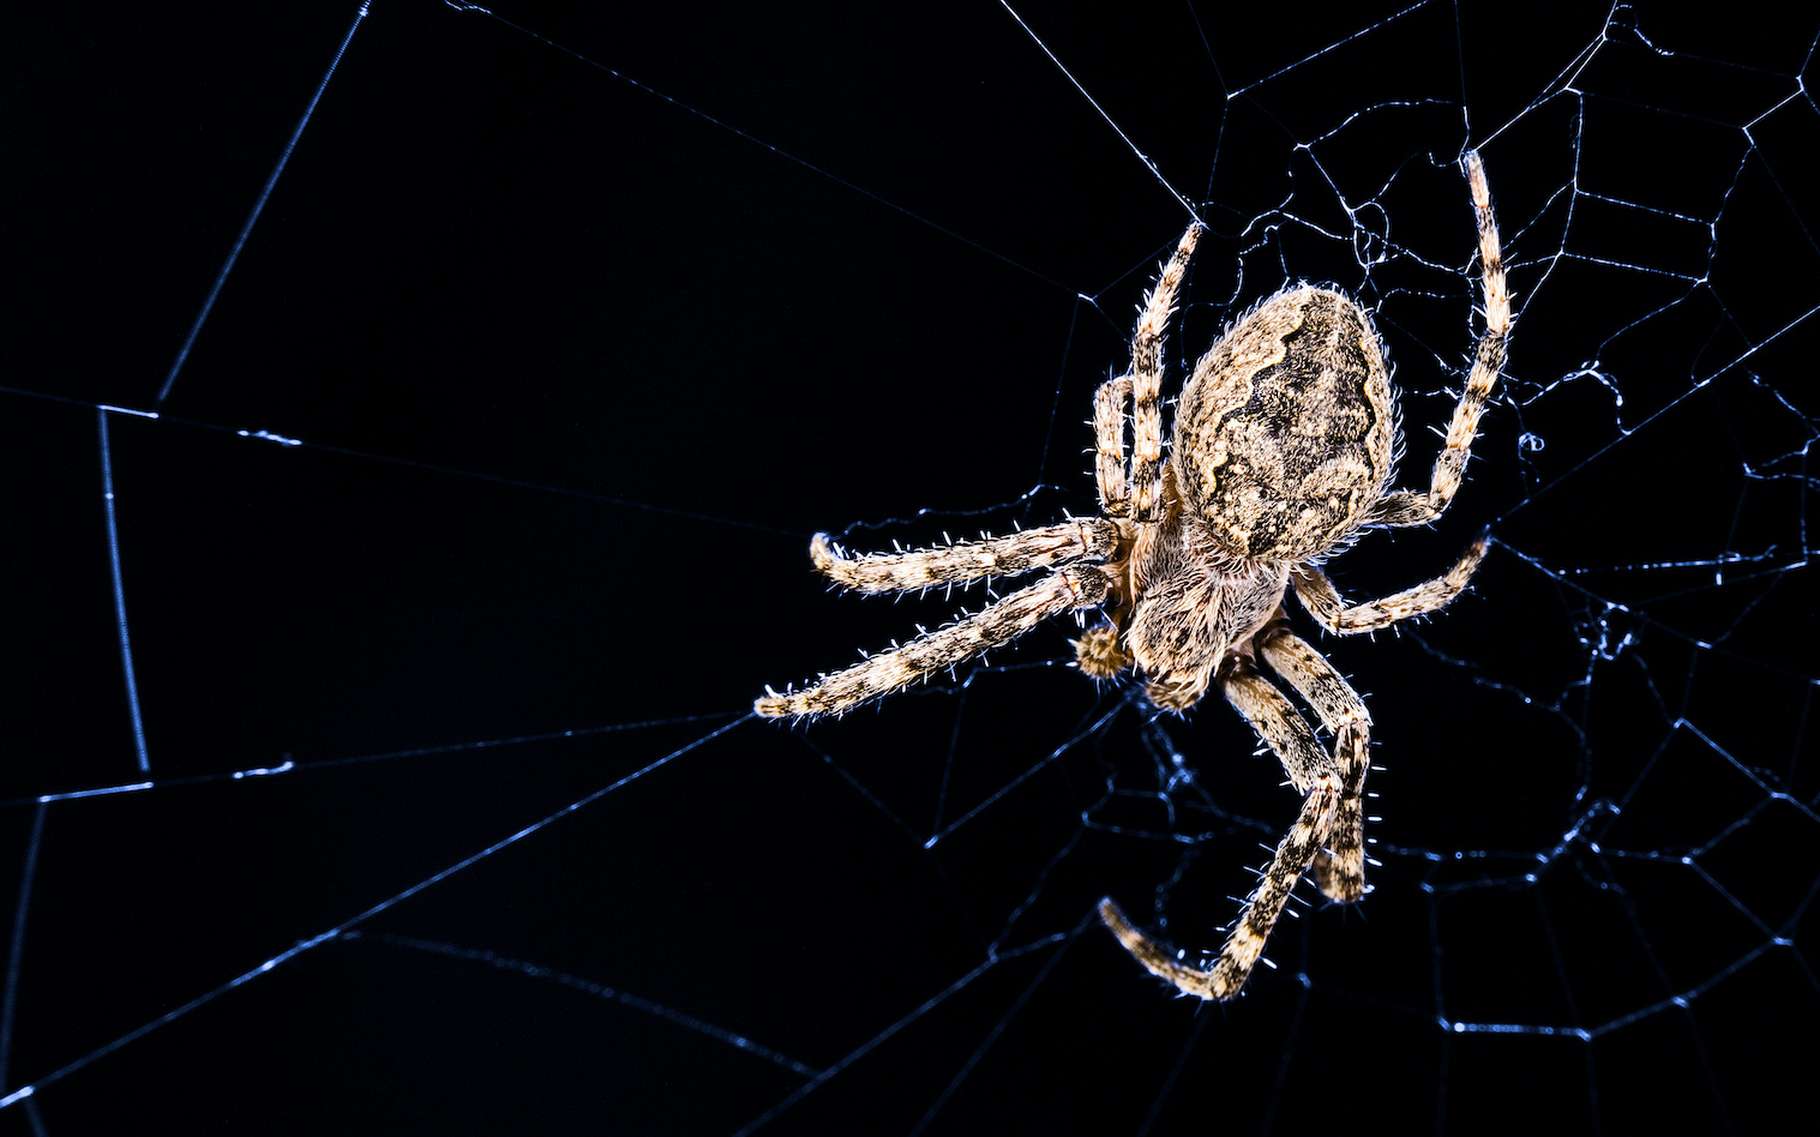 These spiders weave their webs so you can hear better